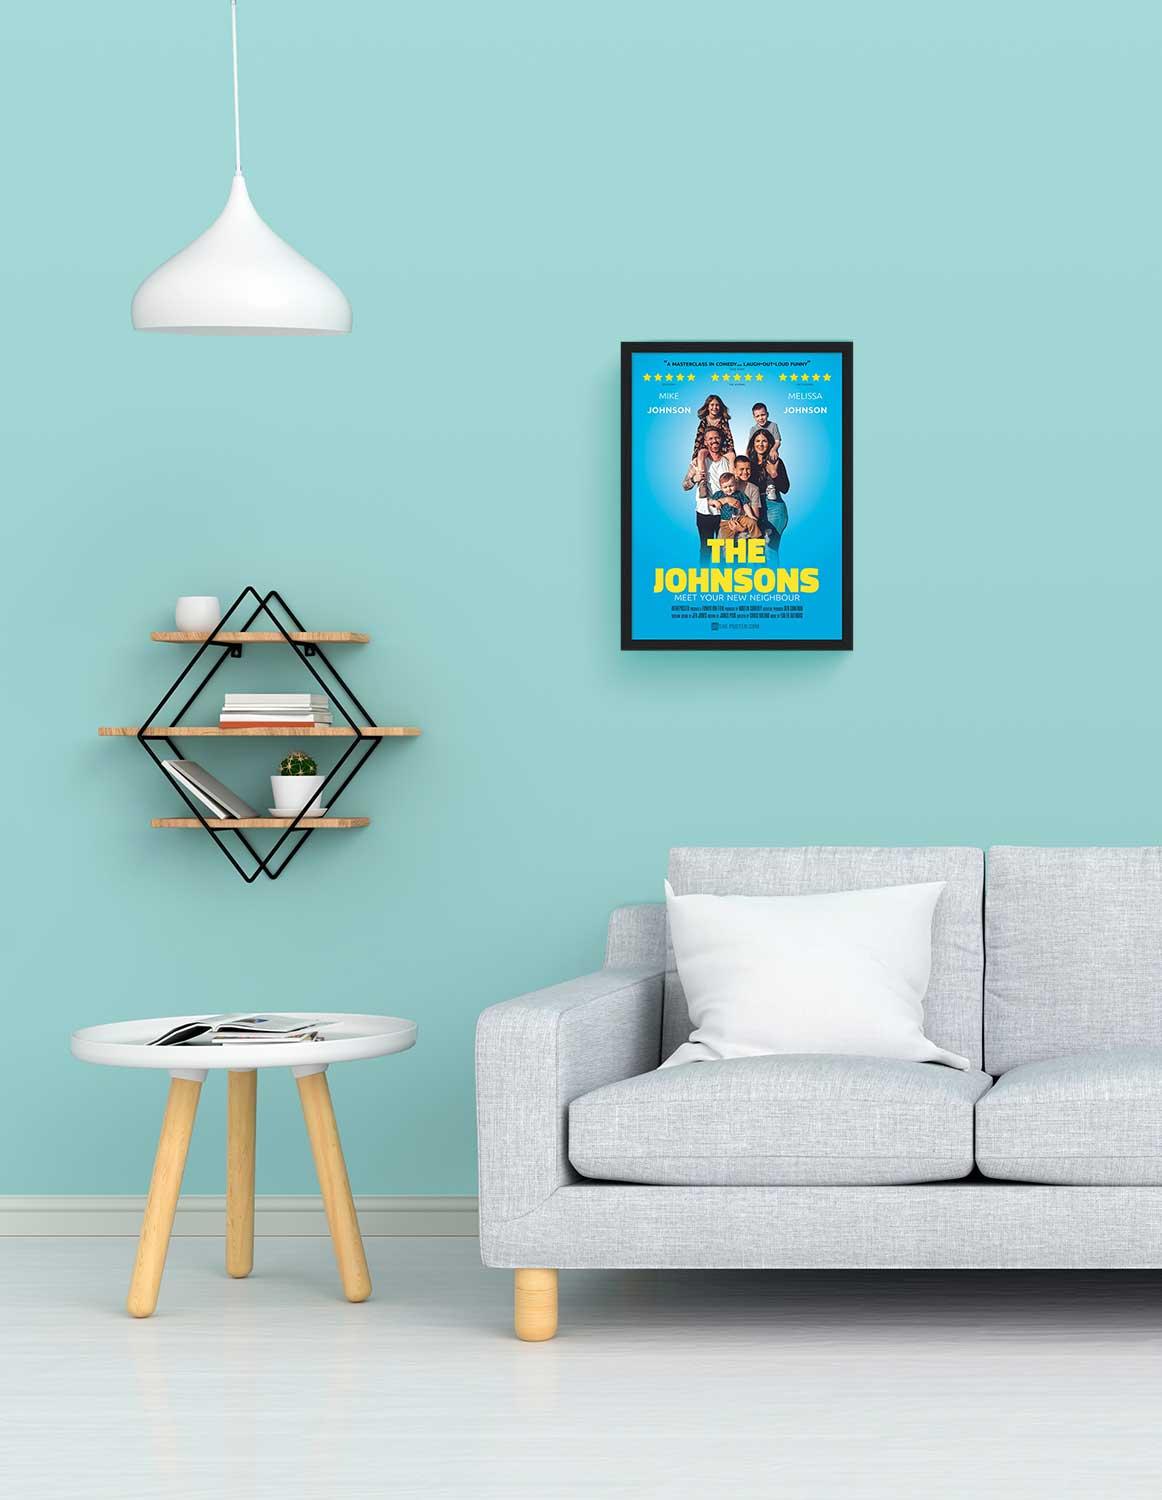 A comedy poster in a small size black frame on the wall above a grey sofa